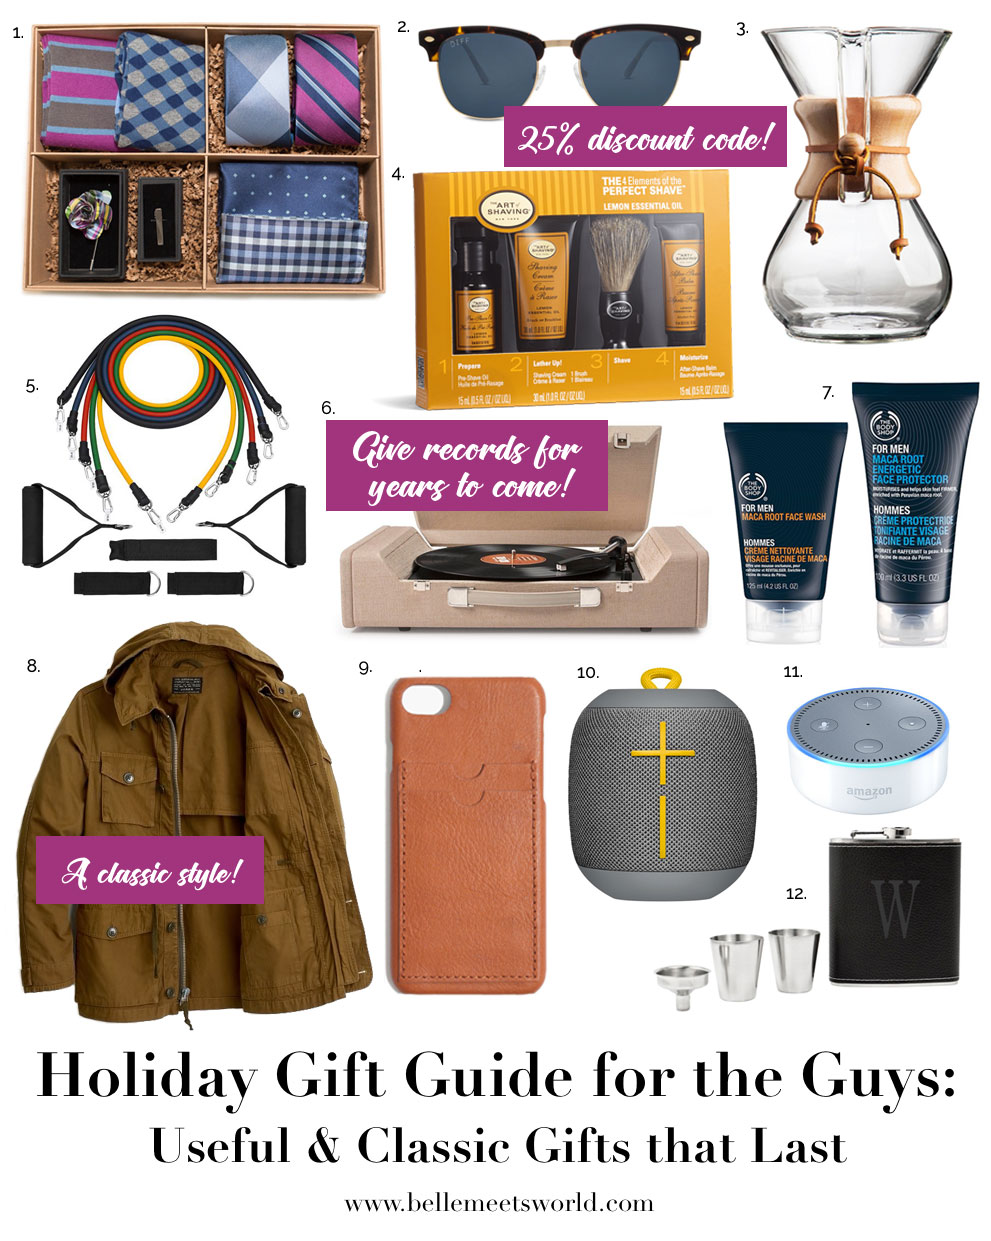 Useful and Classic Holiday Gift Ideas for Men